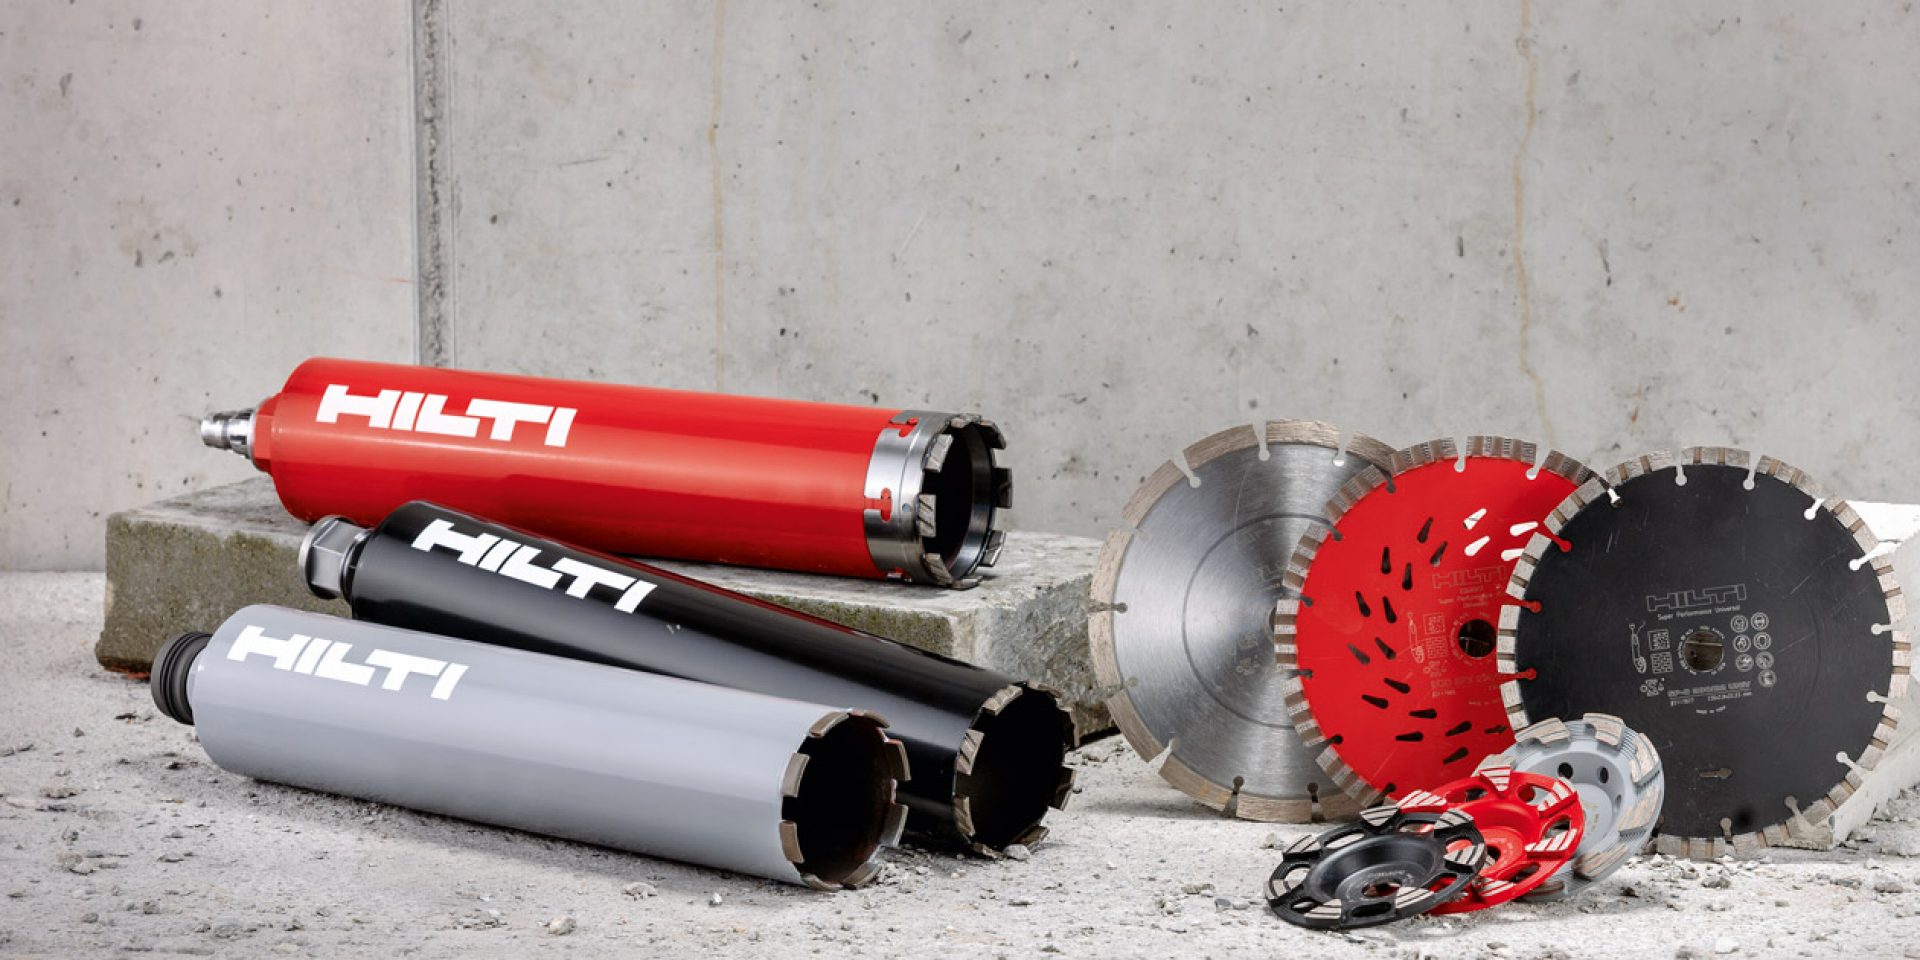 HOW TO SELECT THE RIGHT HILTI INSERTS AND FIXINGS FOR YOUR JOB